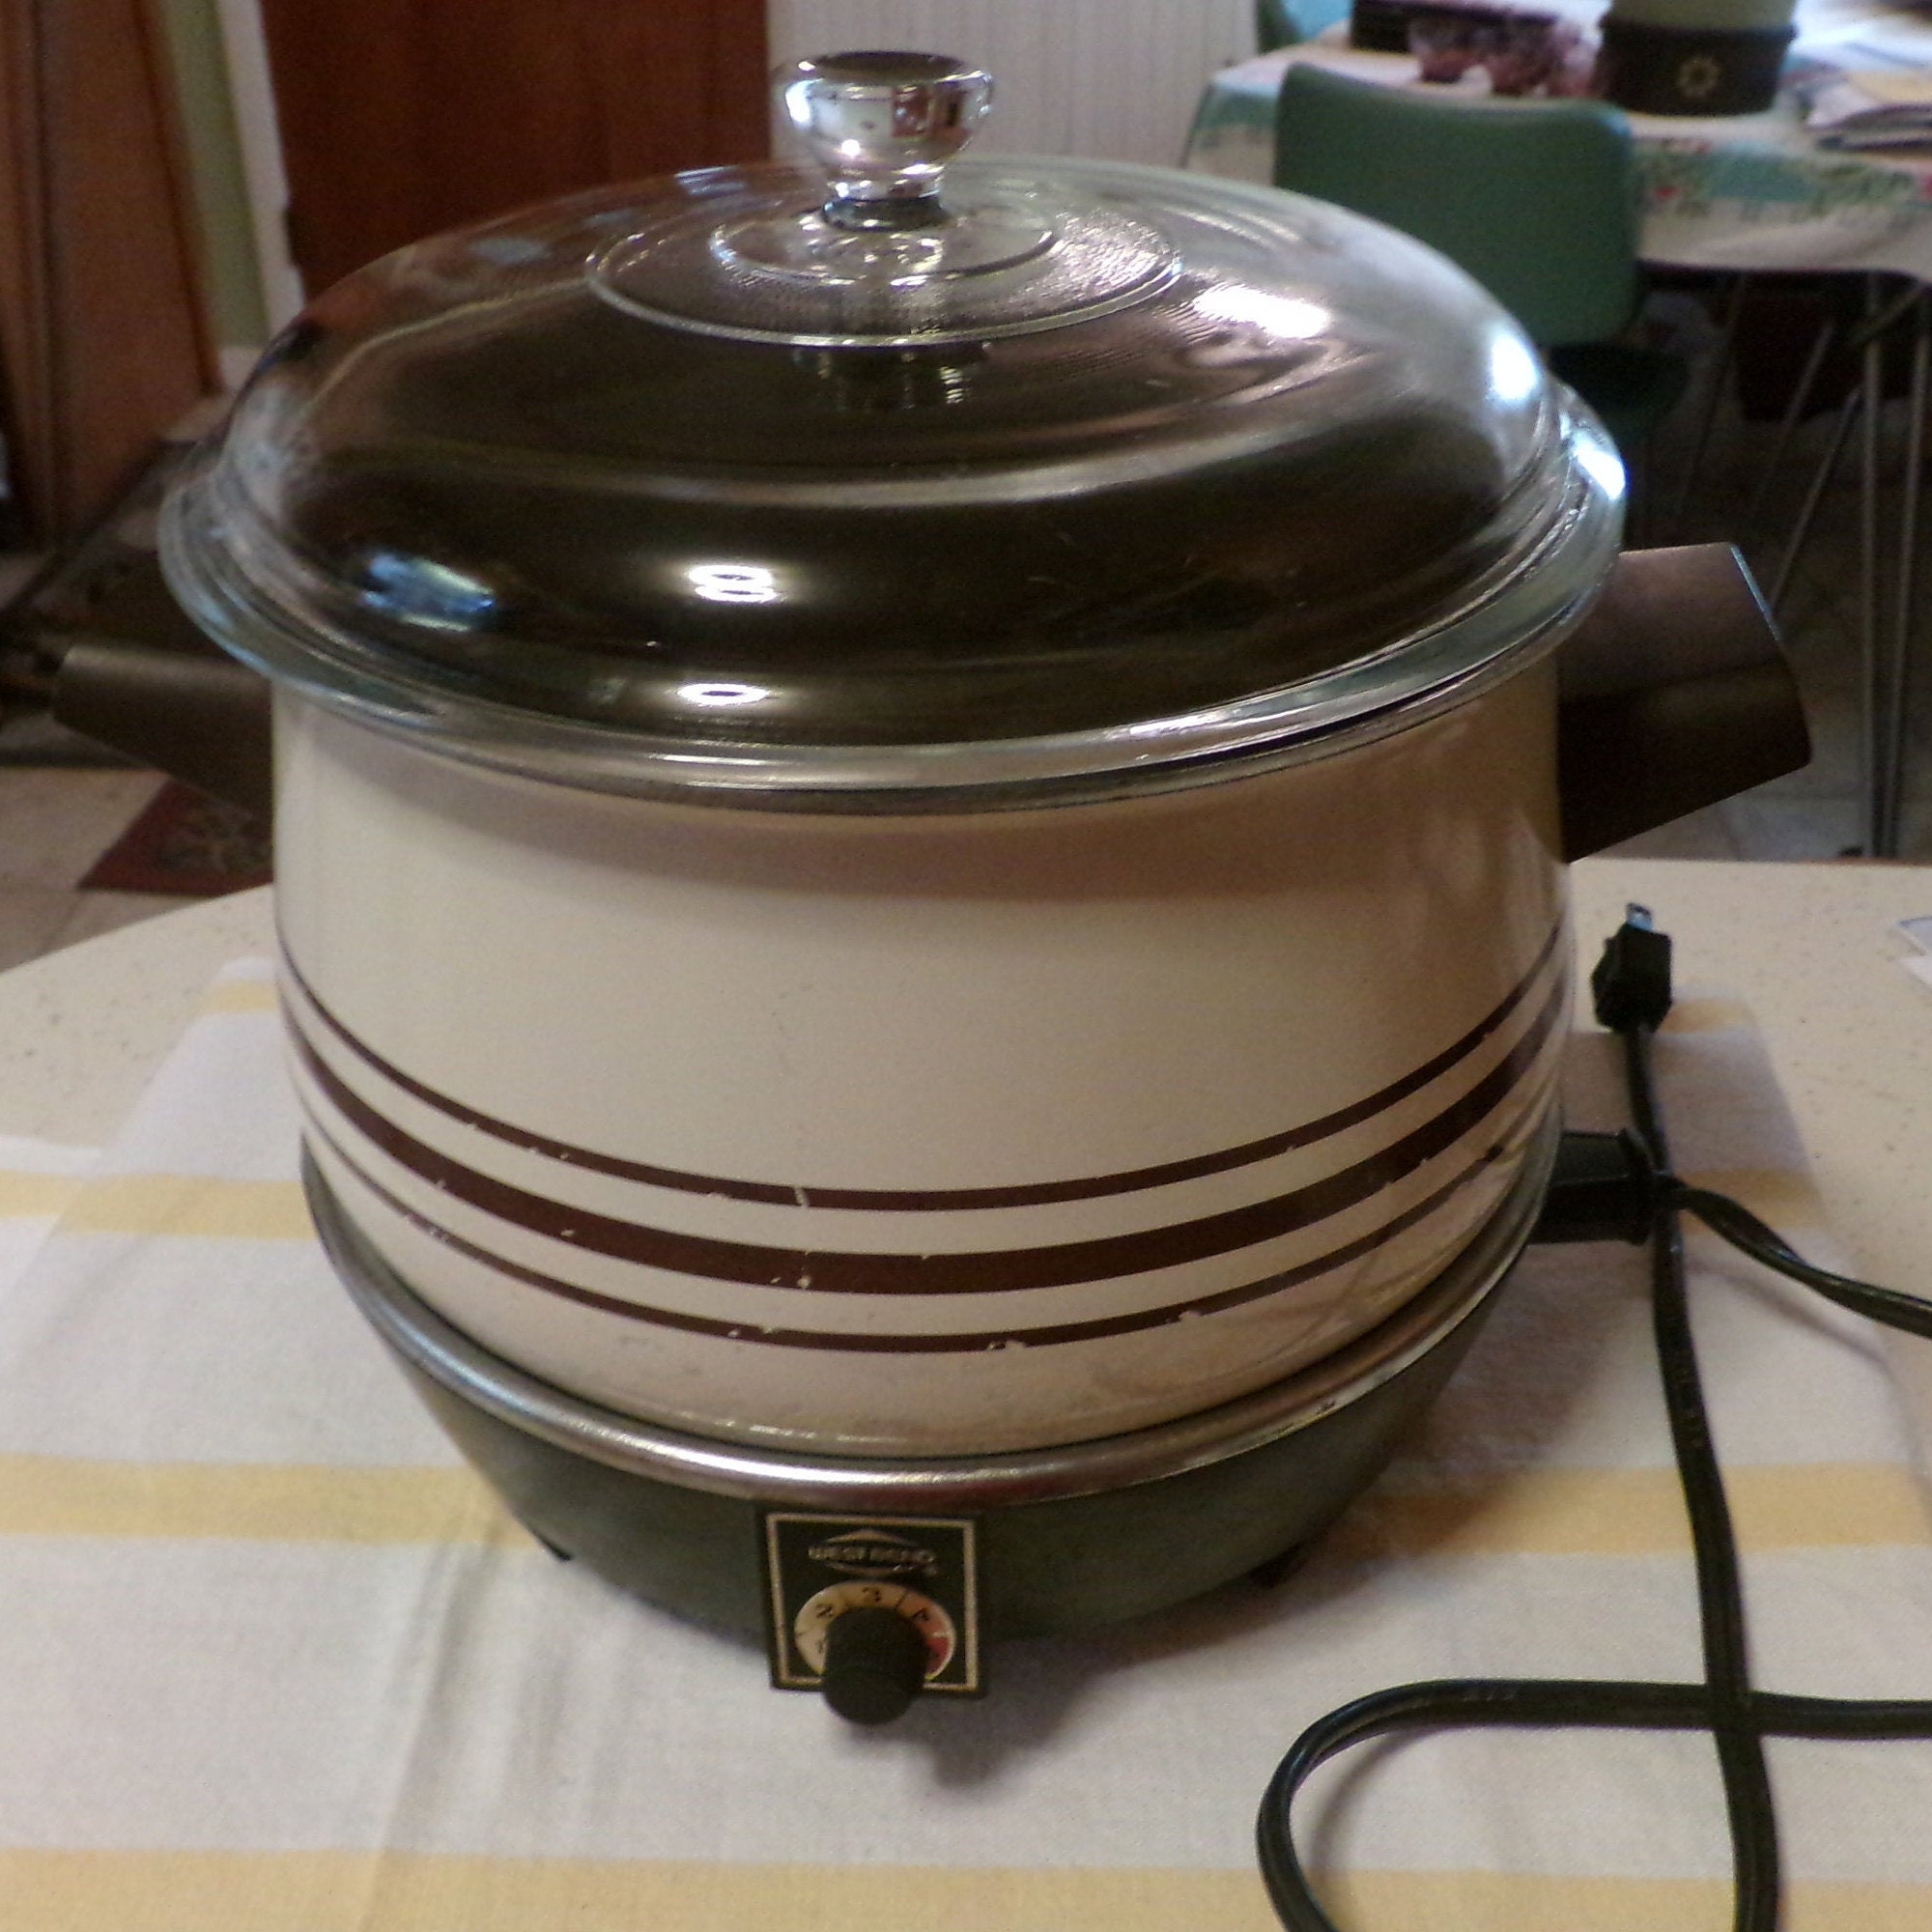 West Bend Rectangle Slow Cooker Cream Brown 6 qt. Tall lid